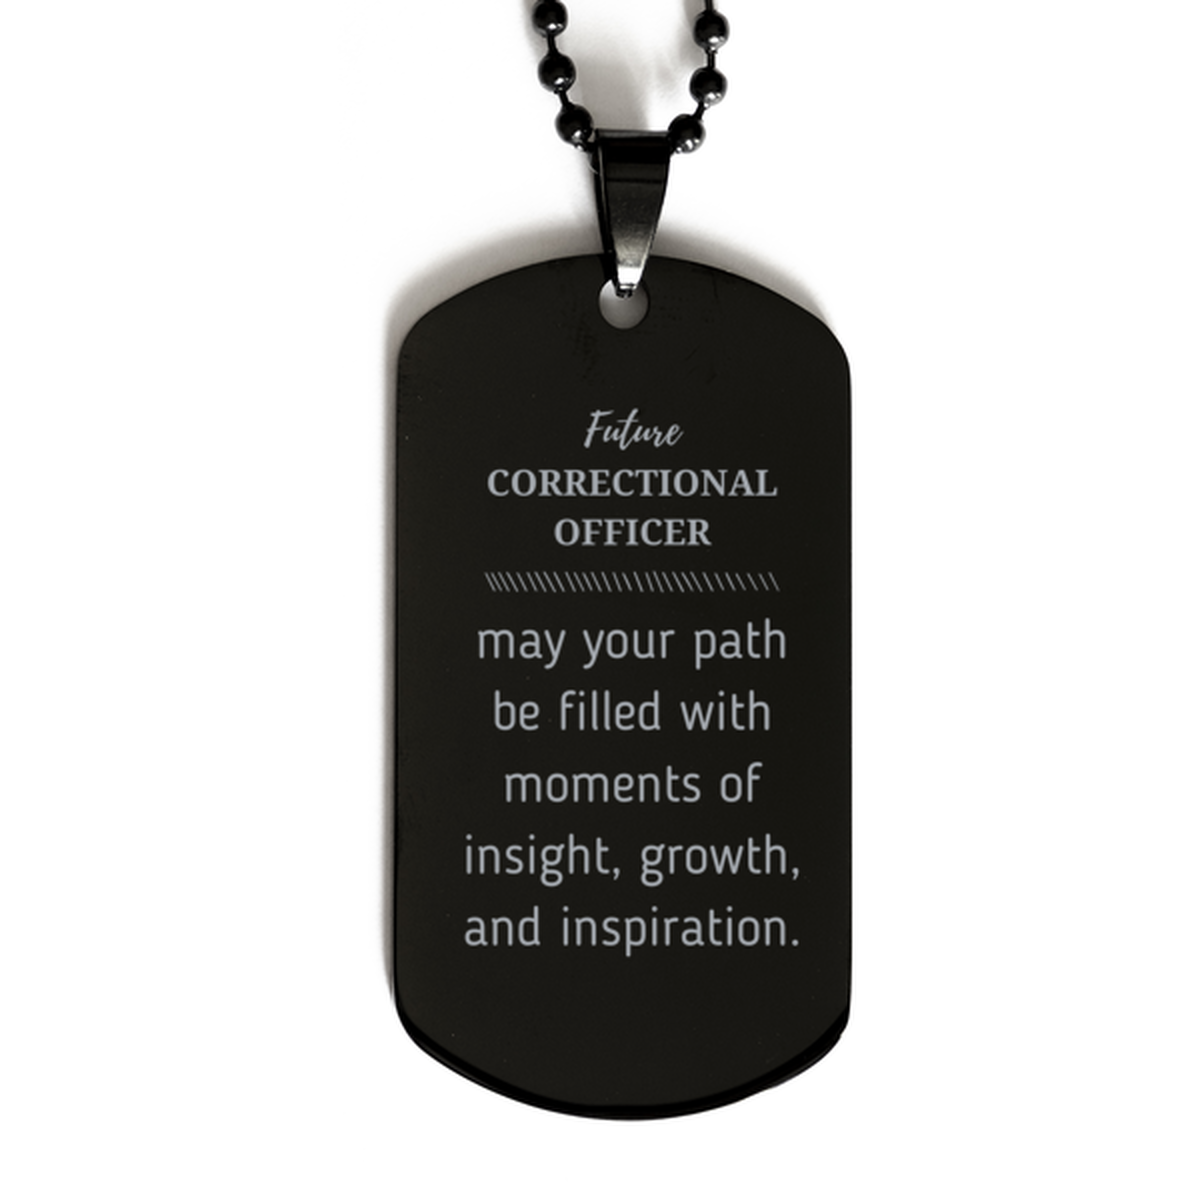 Future Correctional Officer Gifts, May your path be filled with moments of insight, Graduation Gifts for New Correctional Officer, Christmas Unique Black Dog Tag For Men, Women, Friends